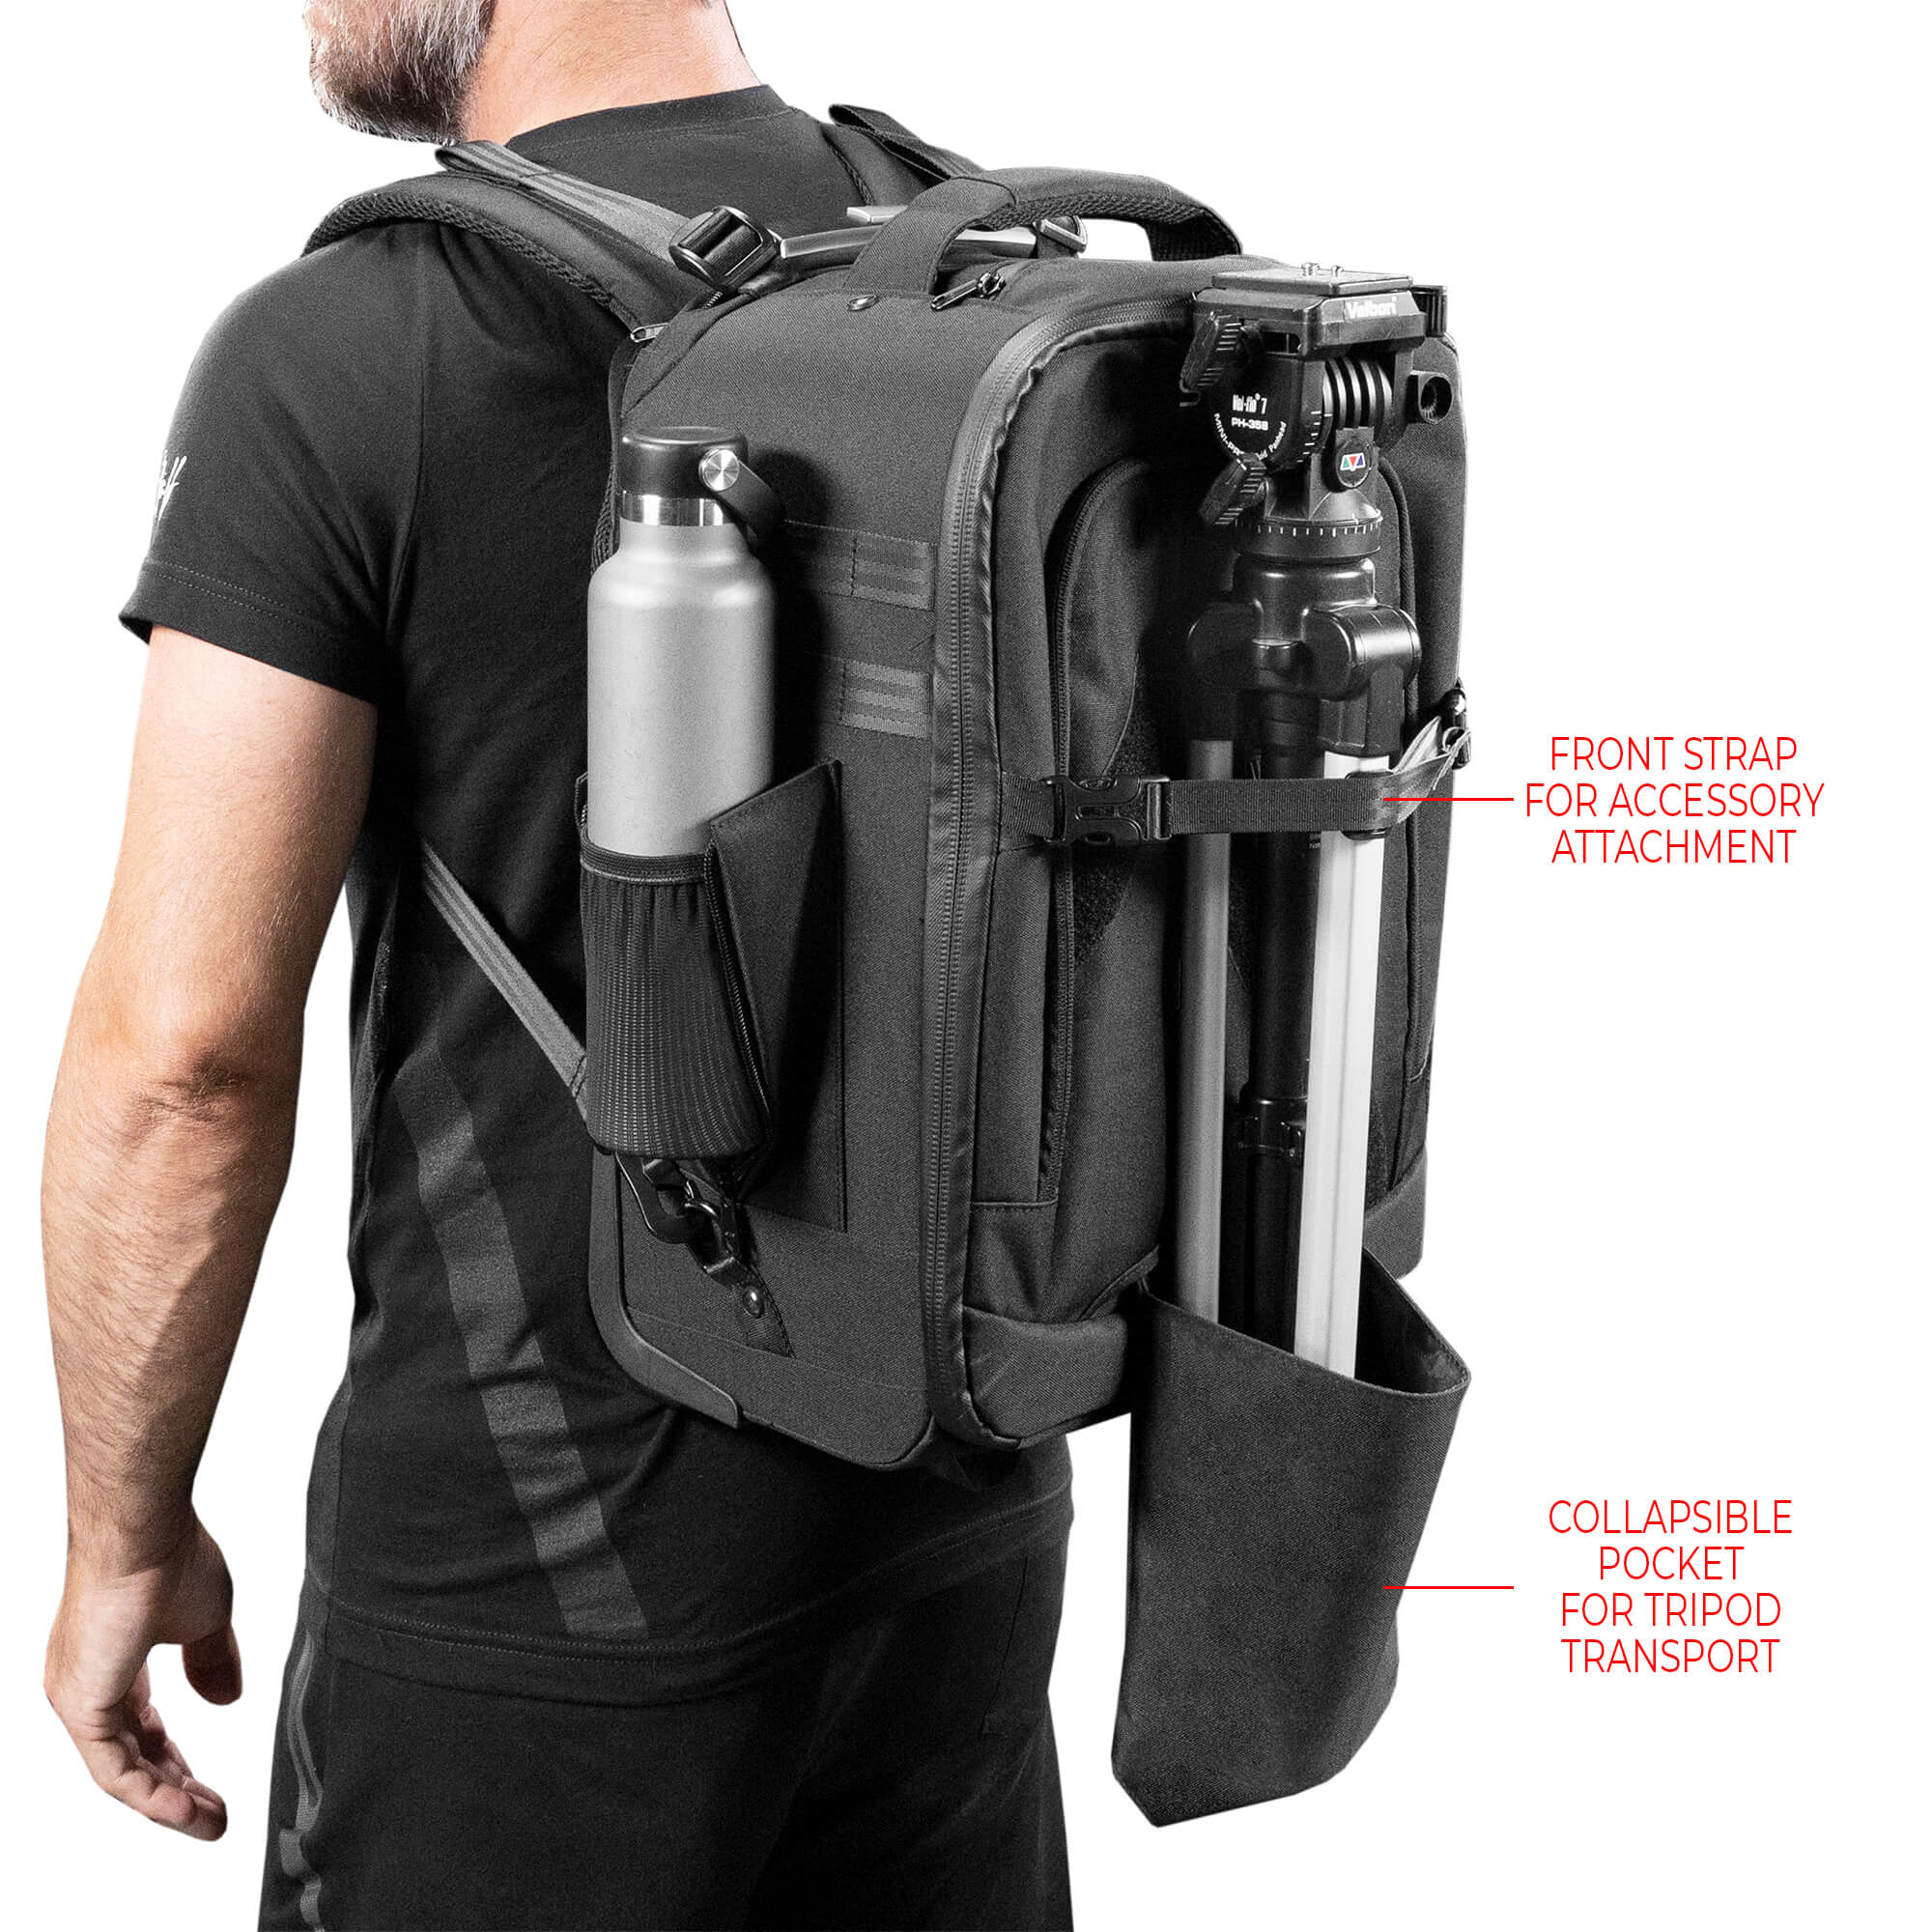 Beg wastefully I will be strong SHAPE Pro Video Camera Backpack - SHAPE